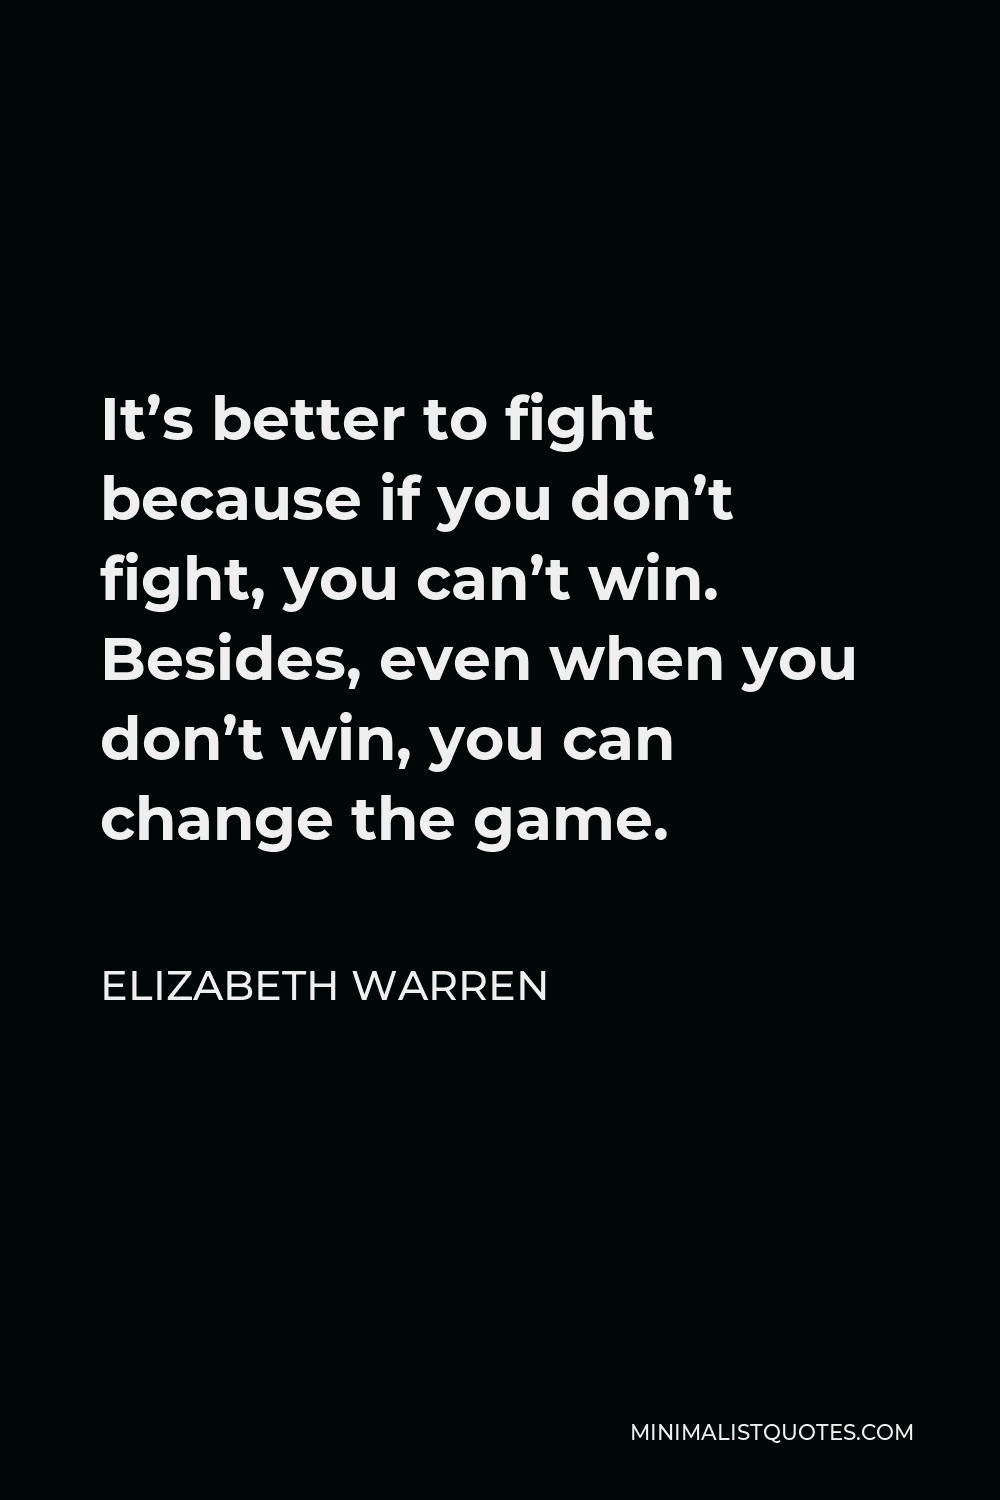 Elizabeth Warren Quote - It’s better to fight because if you don’t fight, you can’t win. Besides, even when you don’t win, you can change the game.